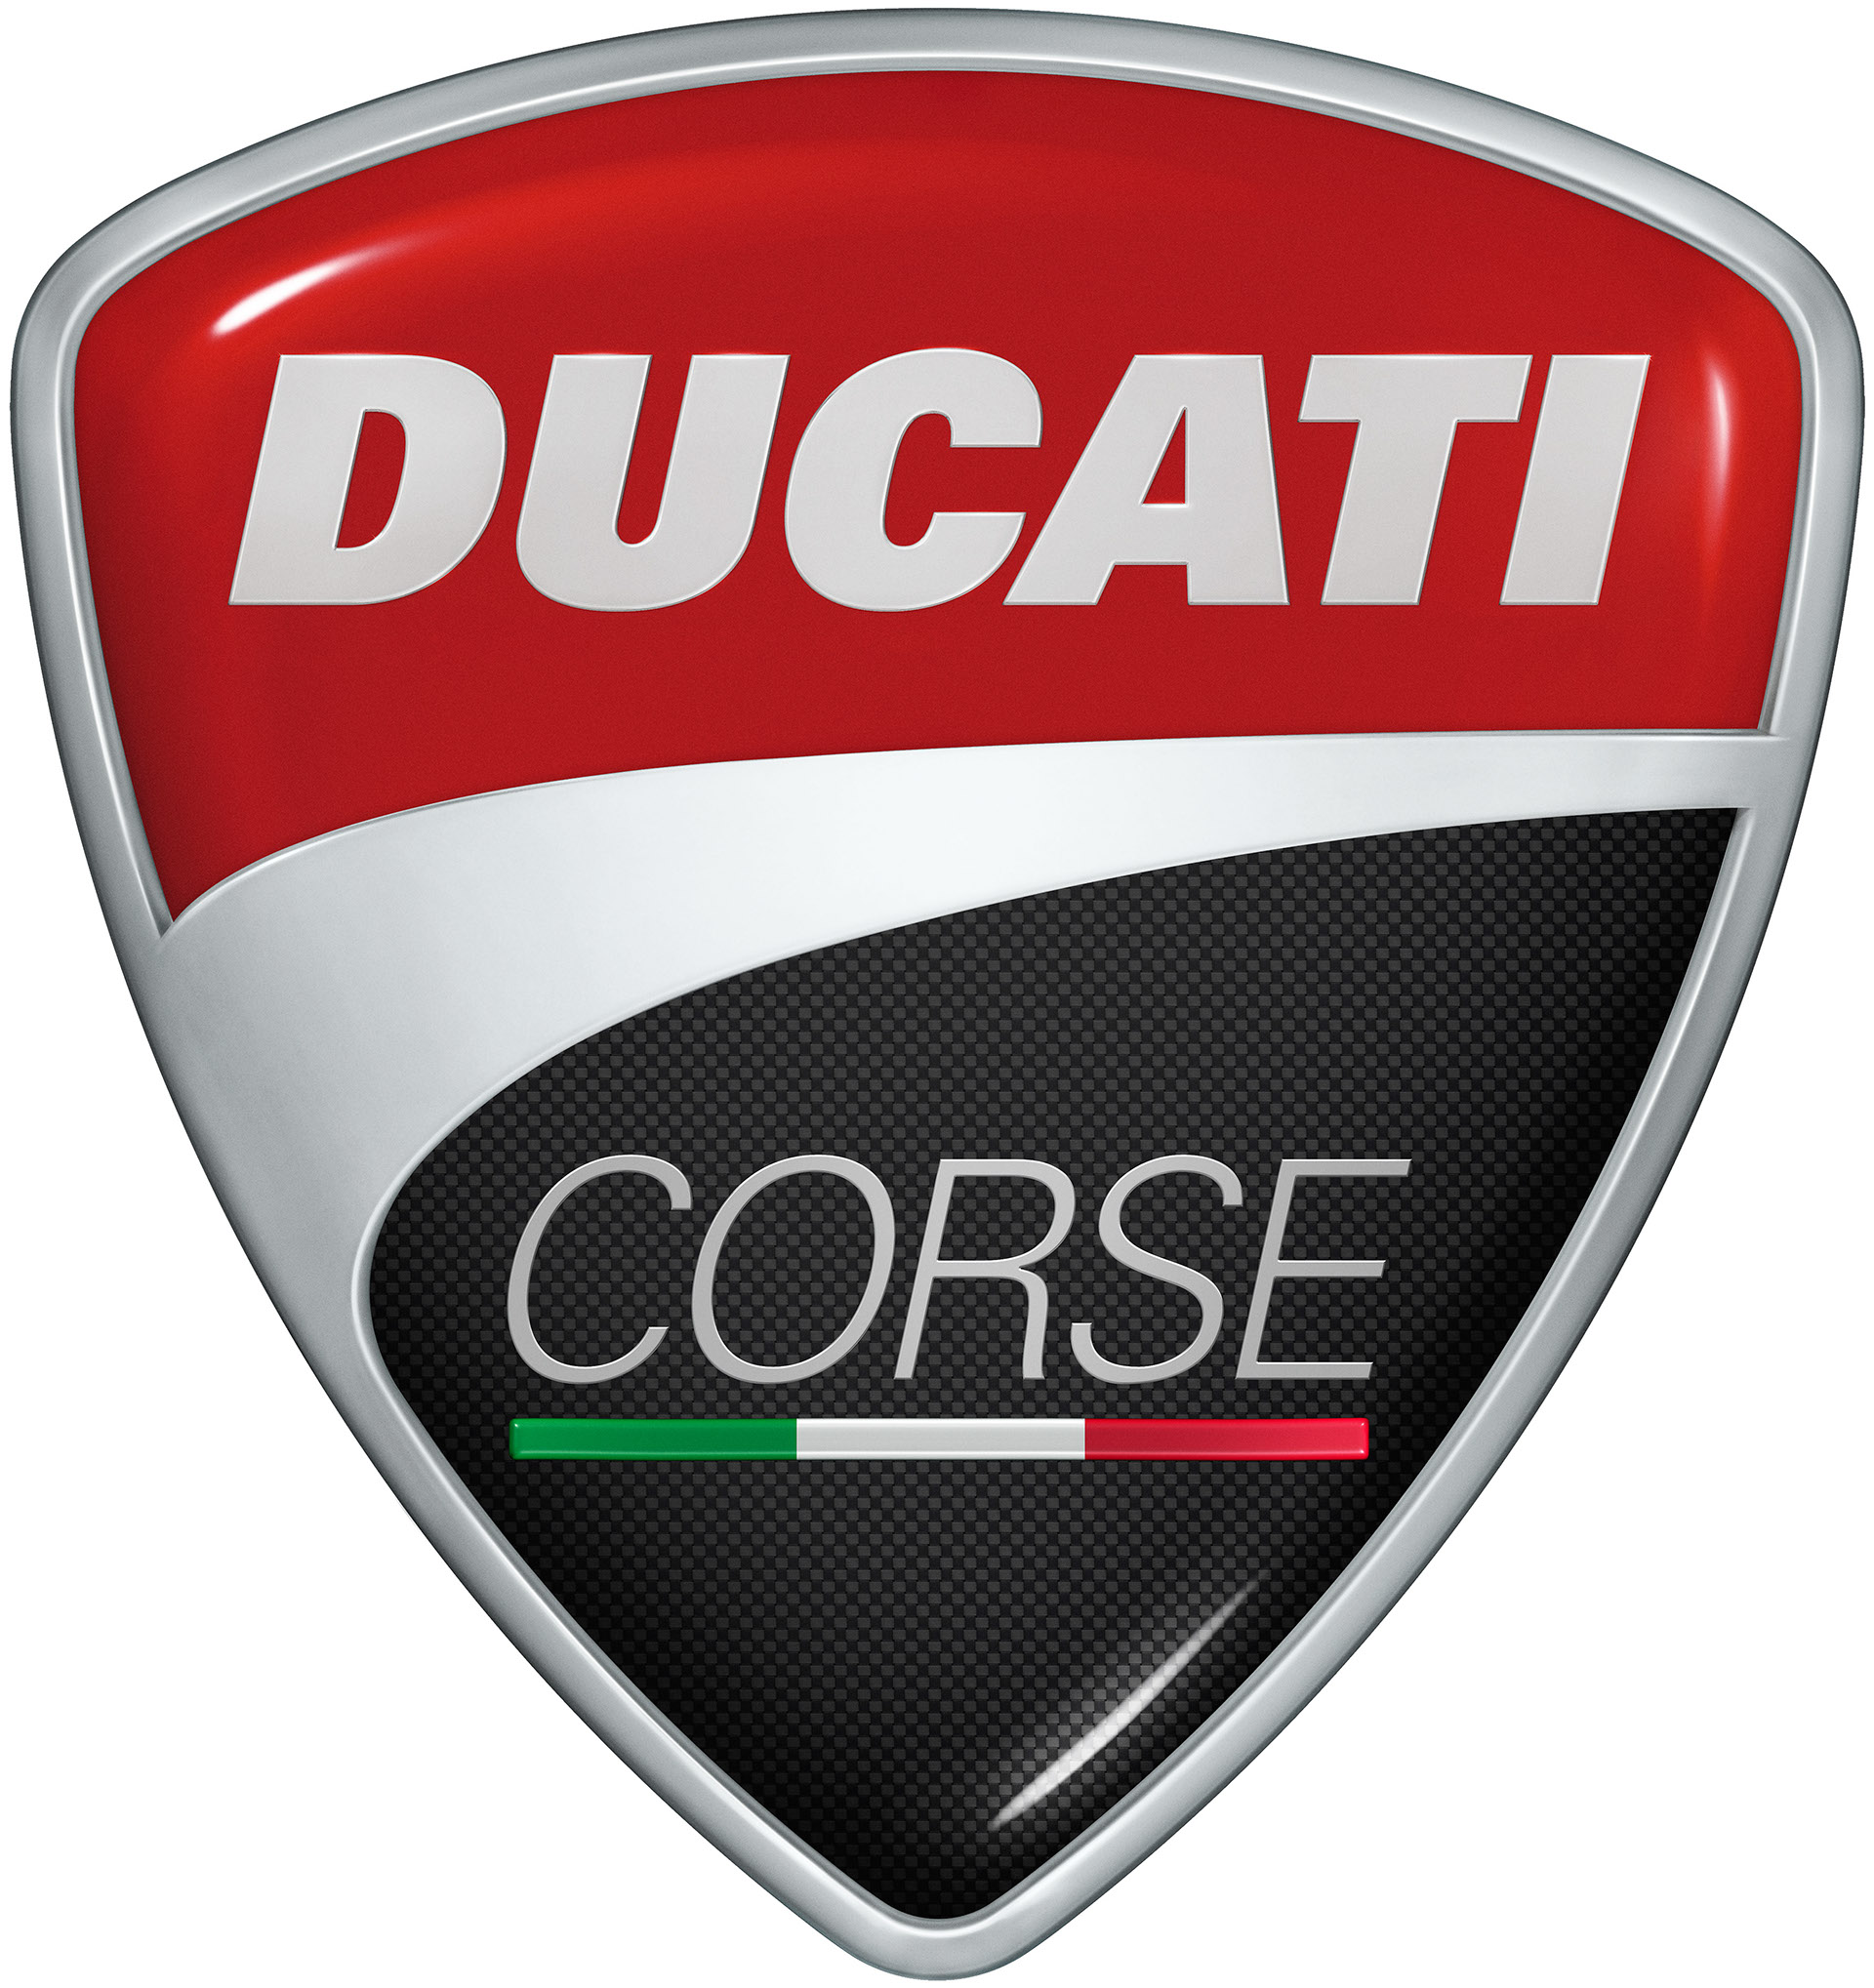 Ducati corse Logo (Ducati spa commission). Official 3D illustrated version  | Behance